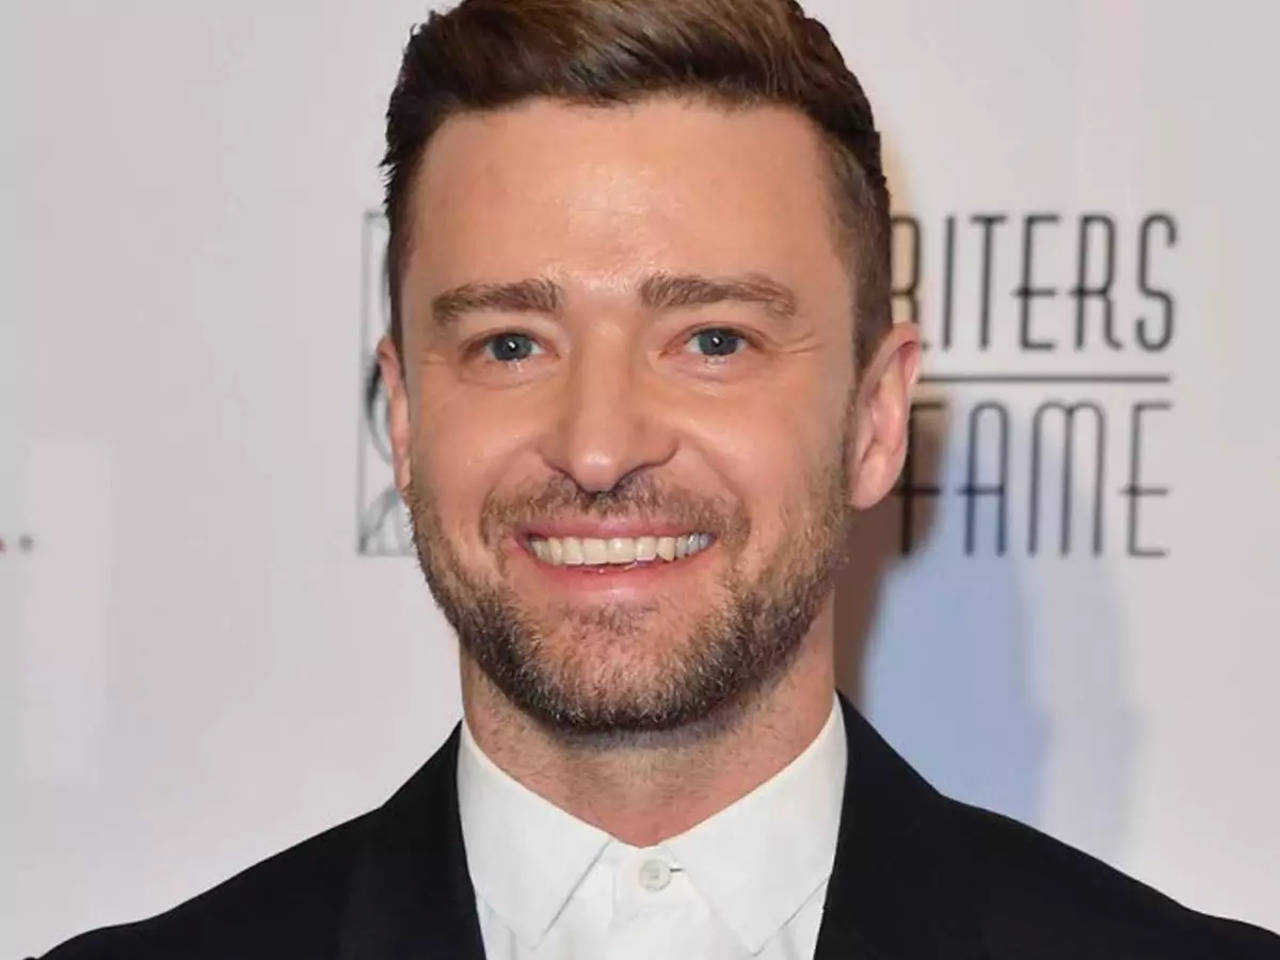 Justin Timberlake Sells Entire Catalog to Hipgnosis Song Management